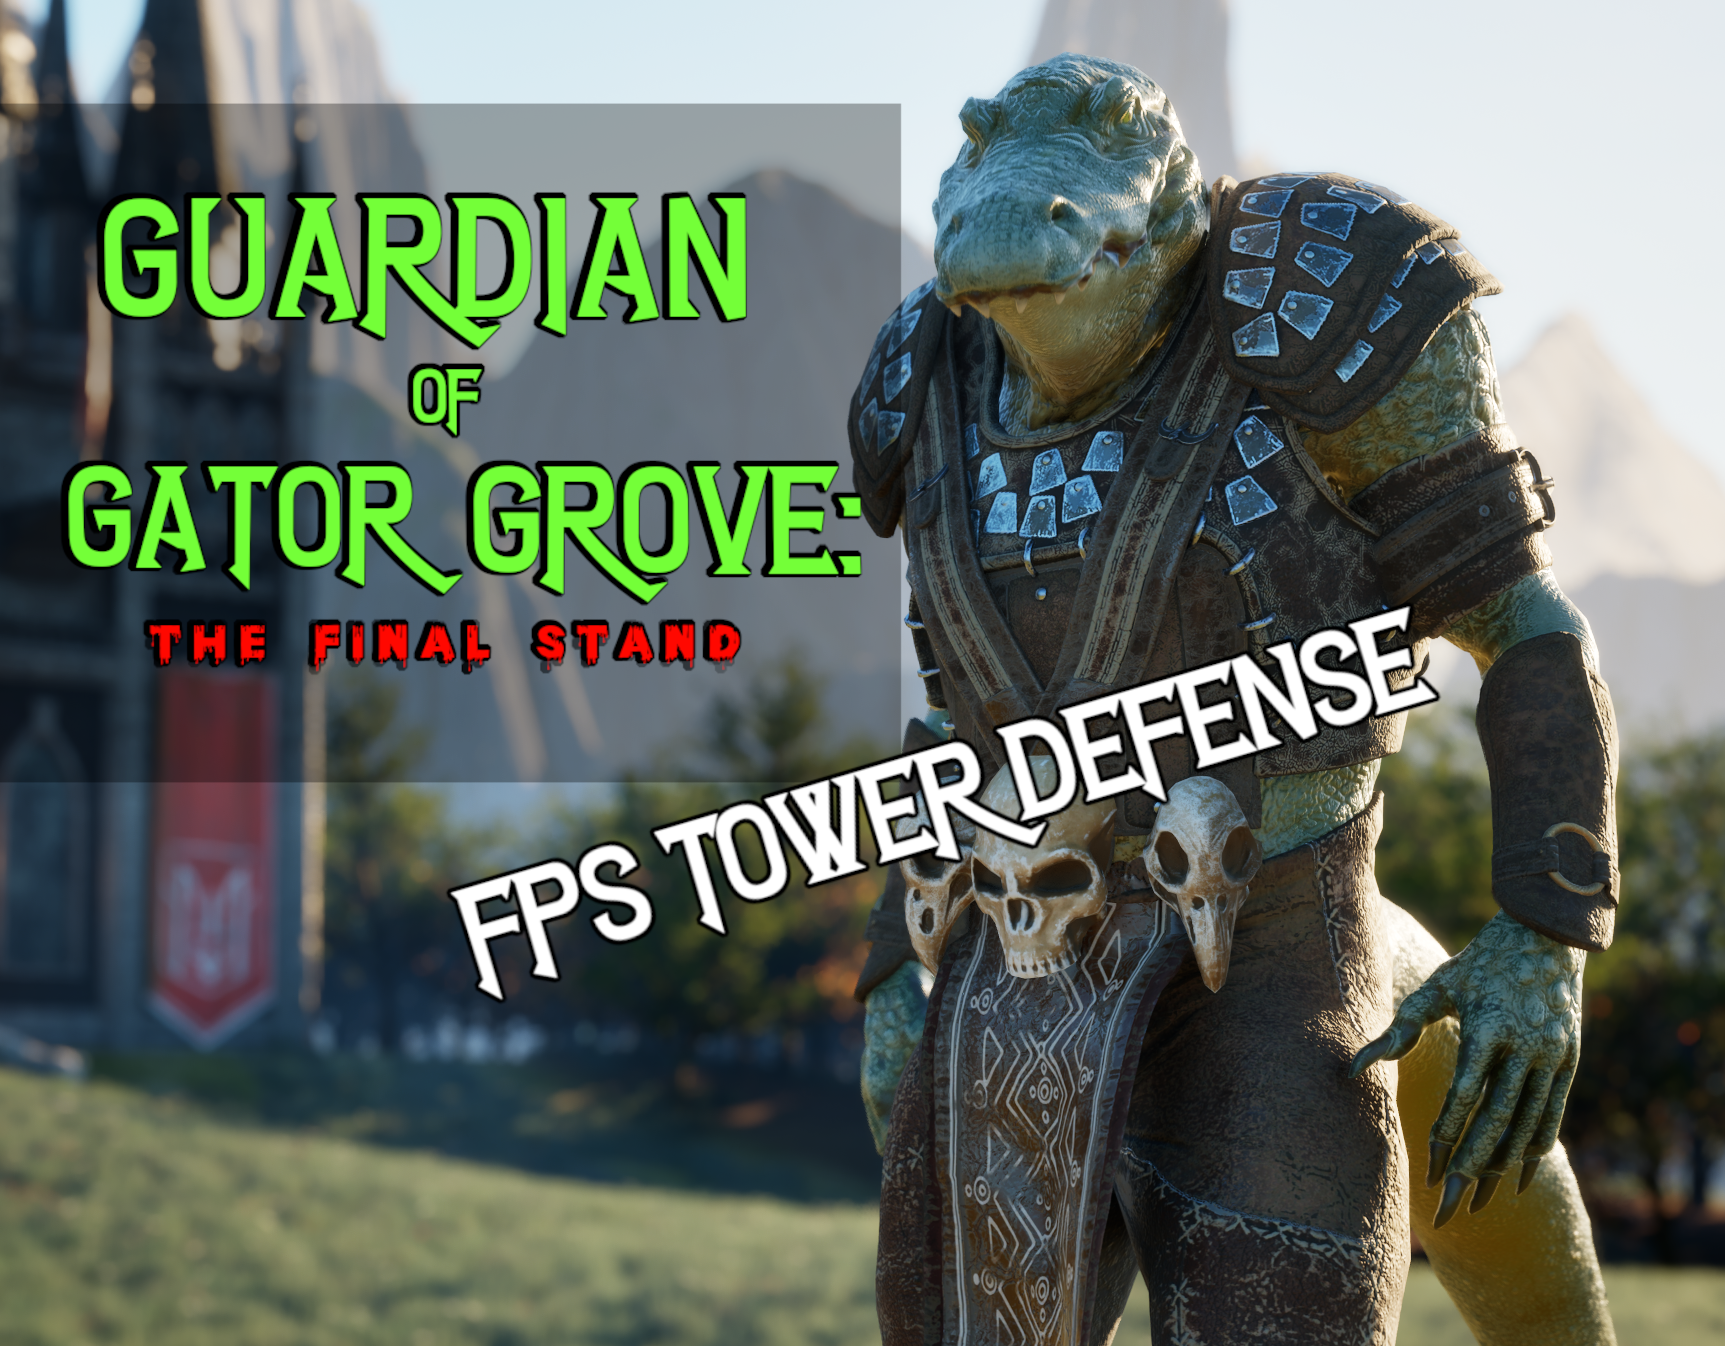 Guardian of Gator Grove: The Final Stand